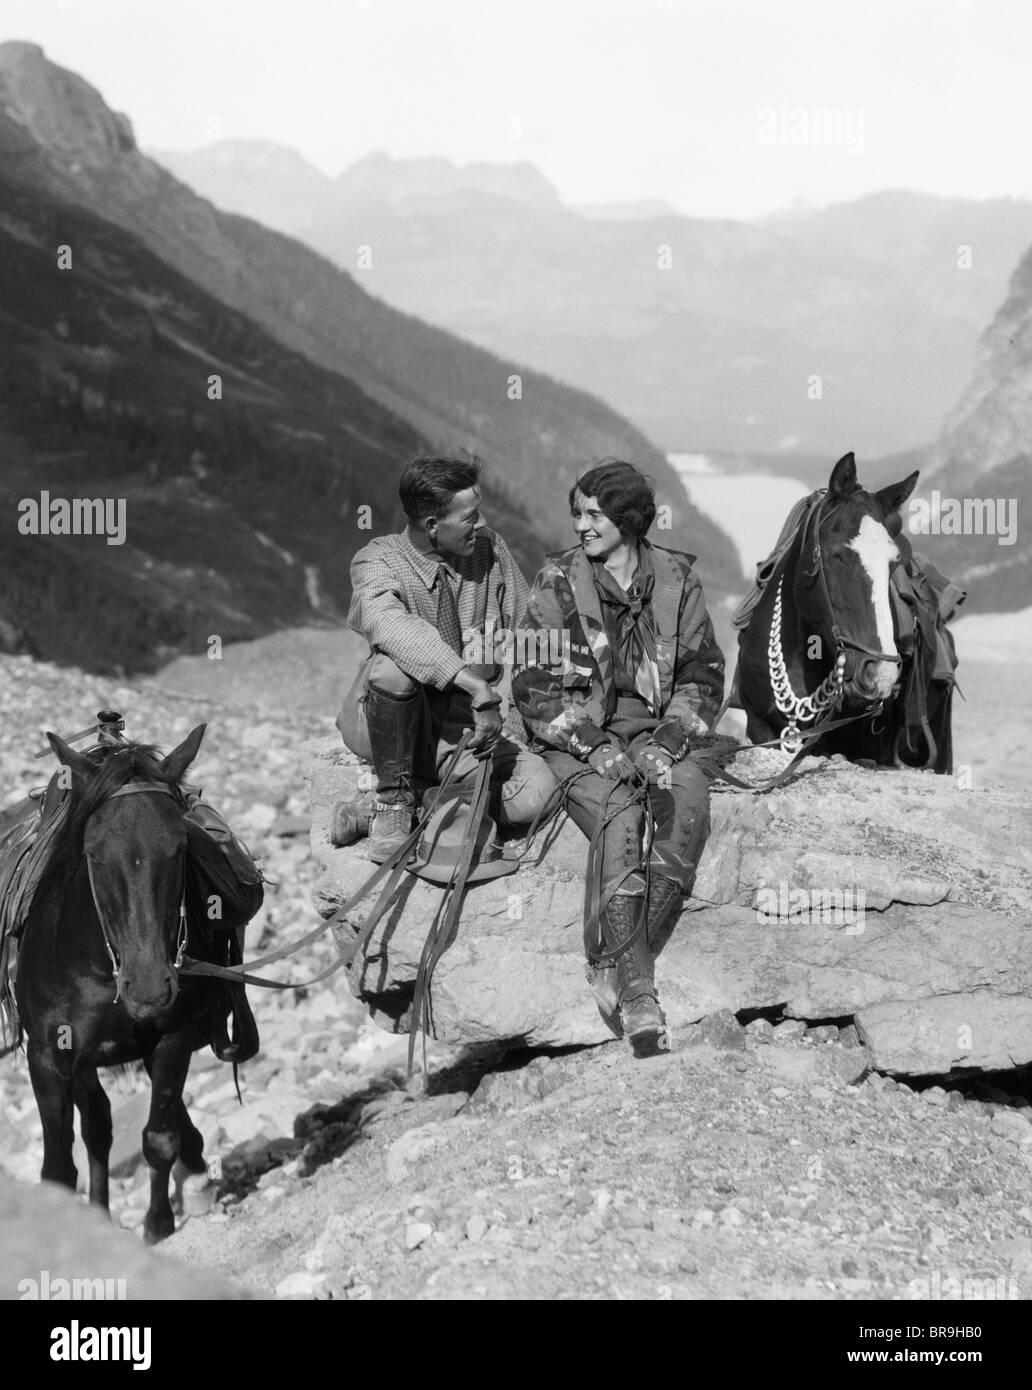 1920s 1930s COUPLE MAN WOMAN WEARING RIDING GEAR JODHPURS BOOTS SPURS SITTING ON LARGE ROCK BY TWO HORSES WITH WESTERN SADDLES Stock Photo